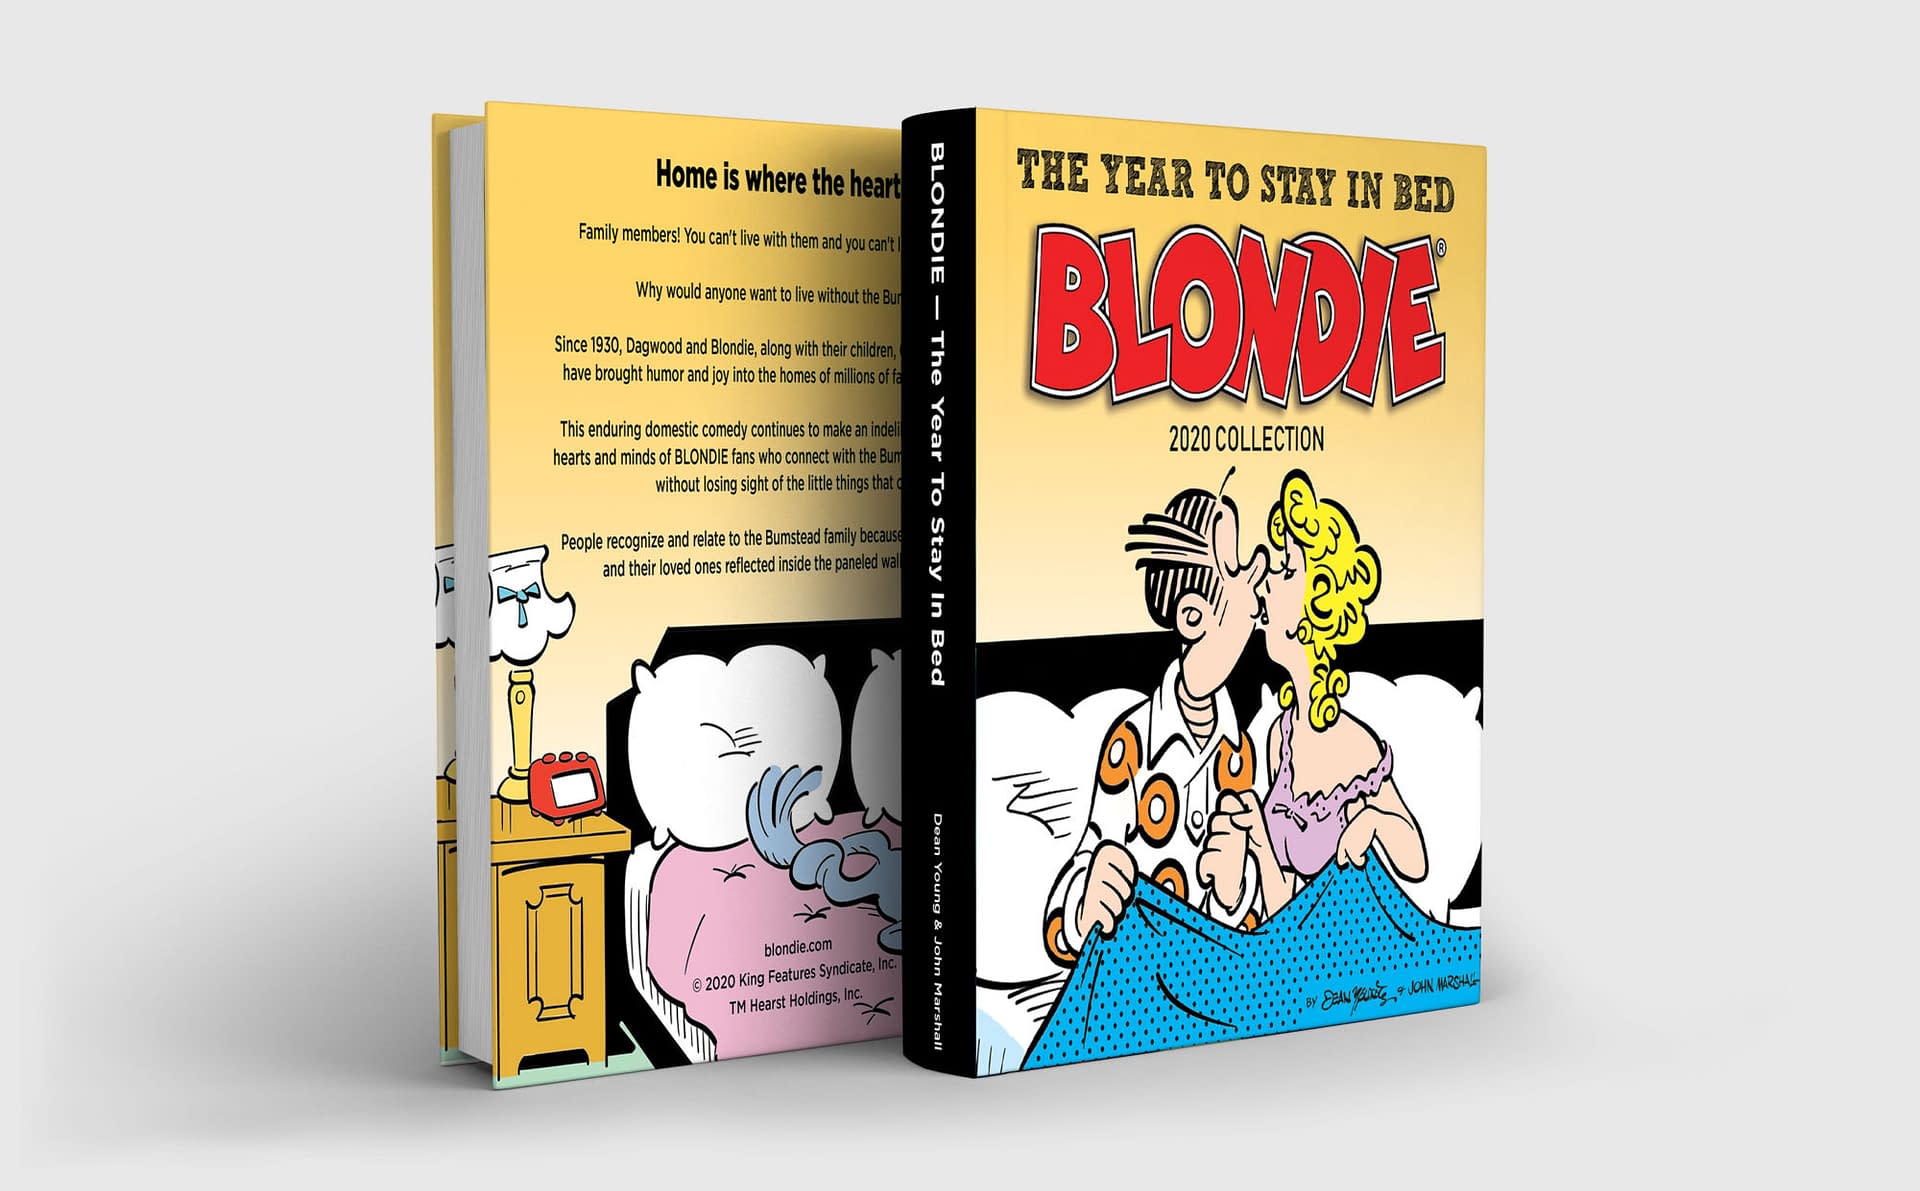 Blondie Celebrates 2020 with The Year to Stay in Bed Collection